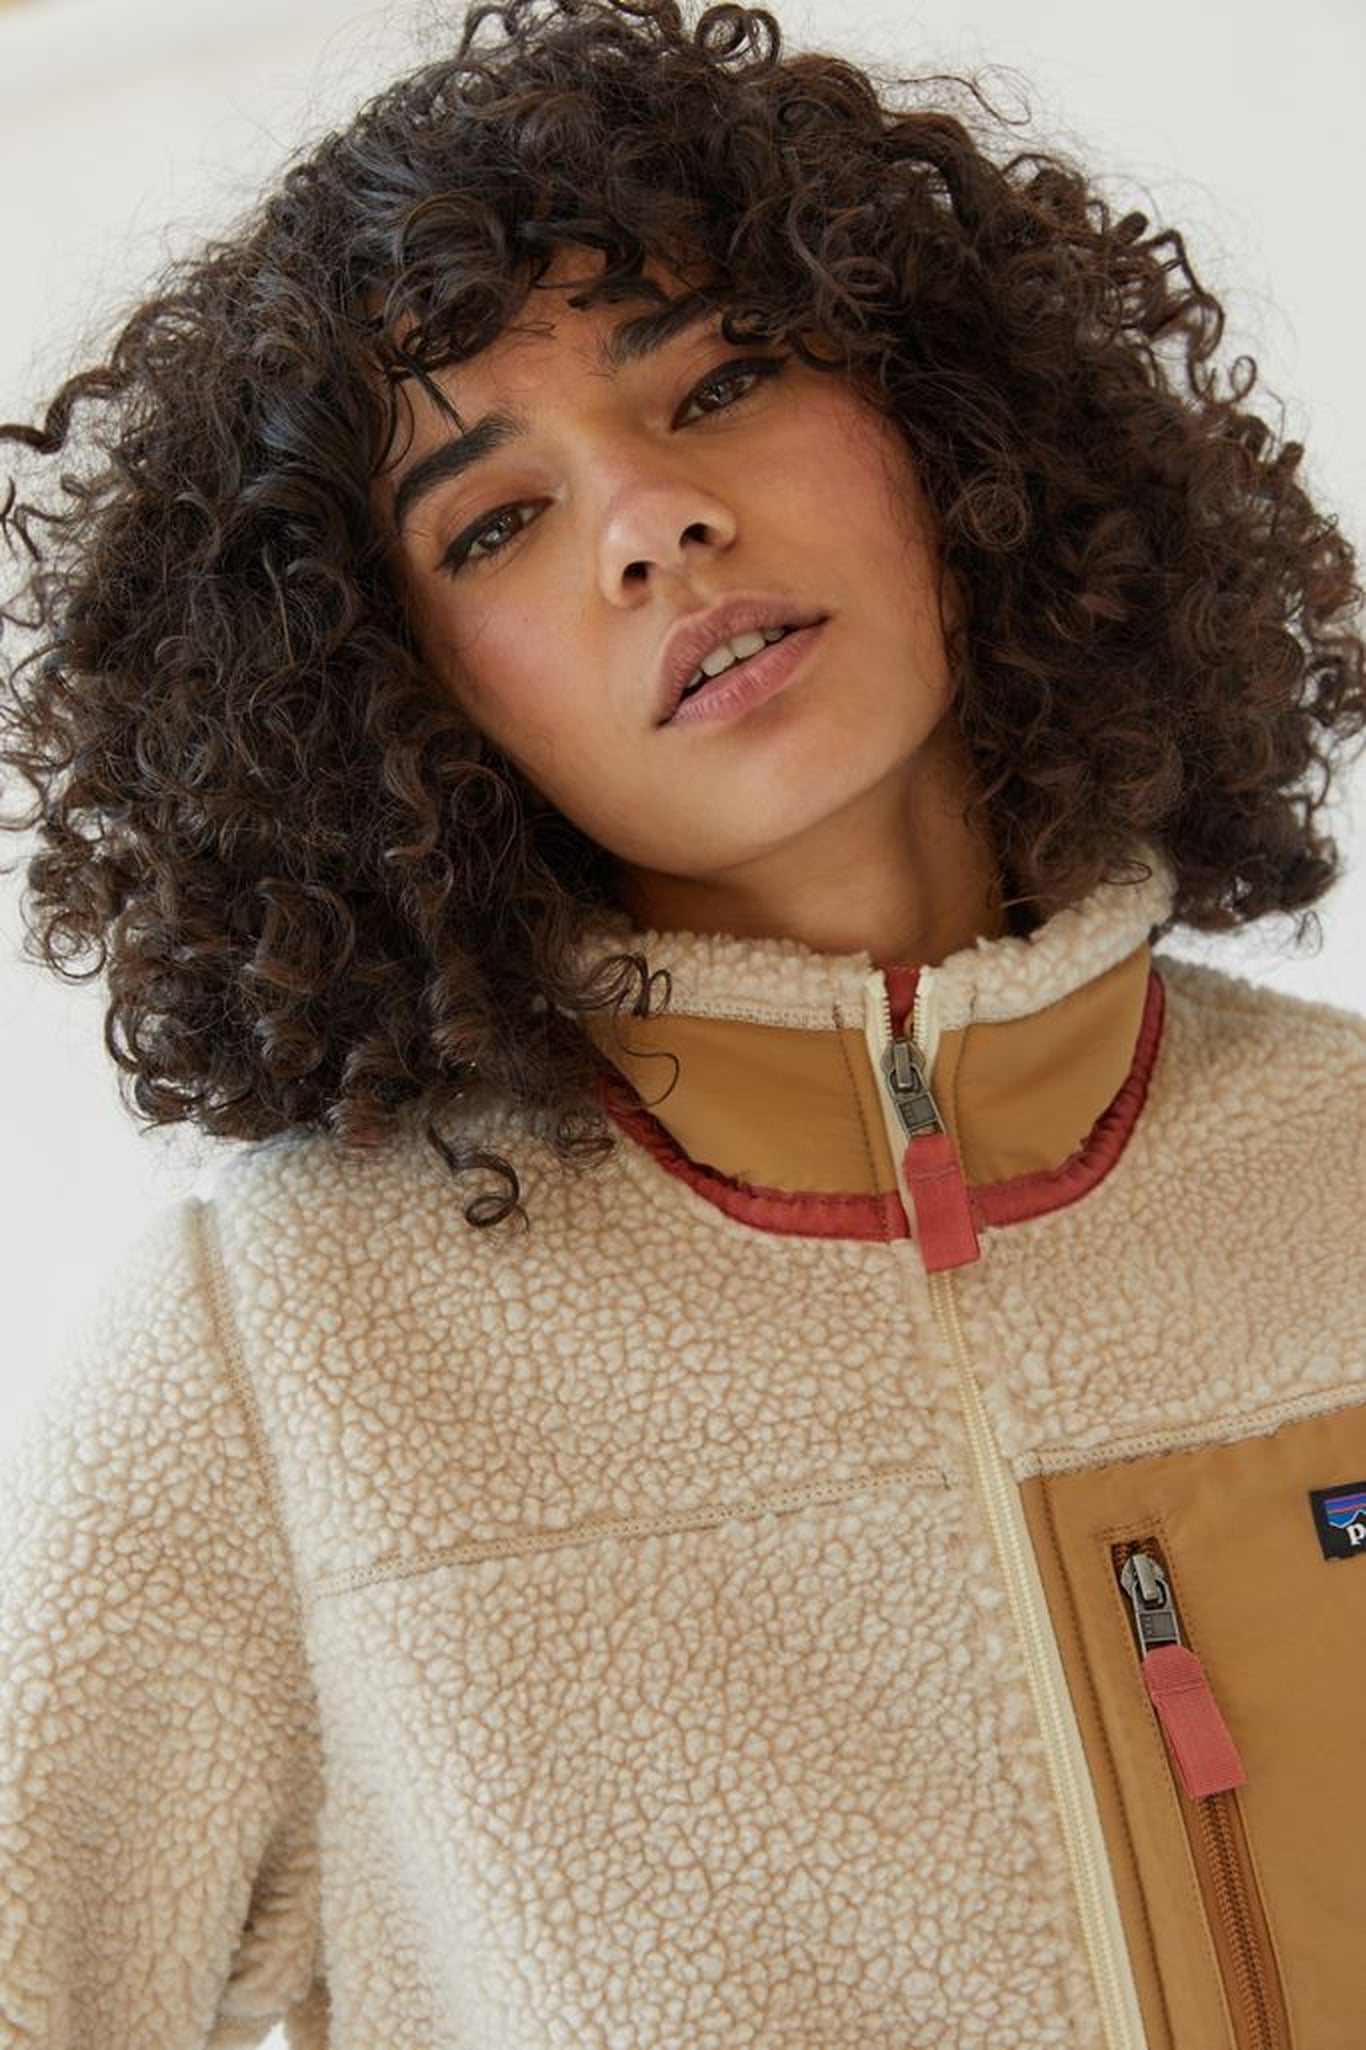 The 7 Best Fashion Pieces From Outdoor Brands in 2020-21 | POPSUGAR Fashion